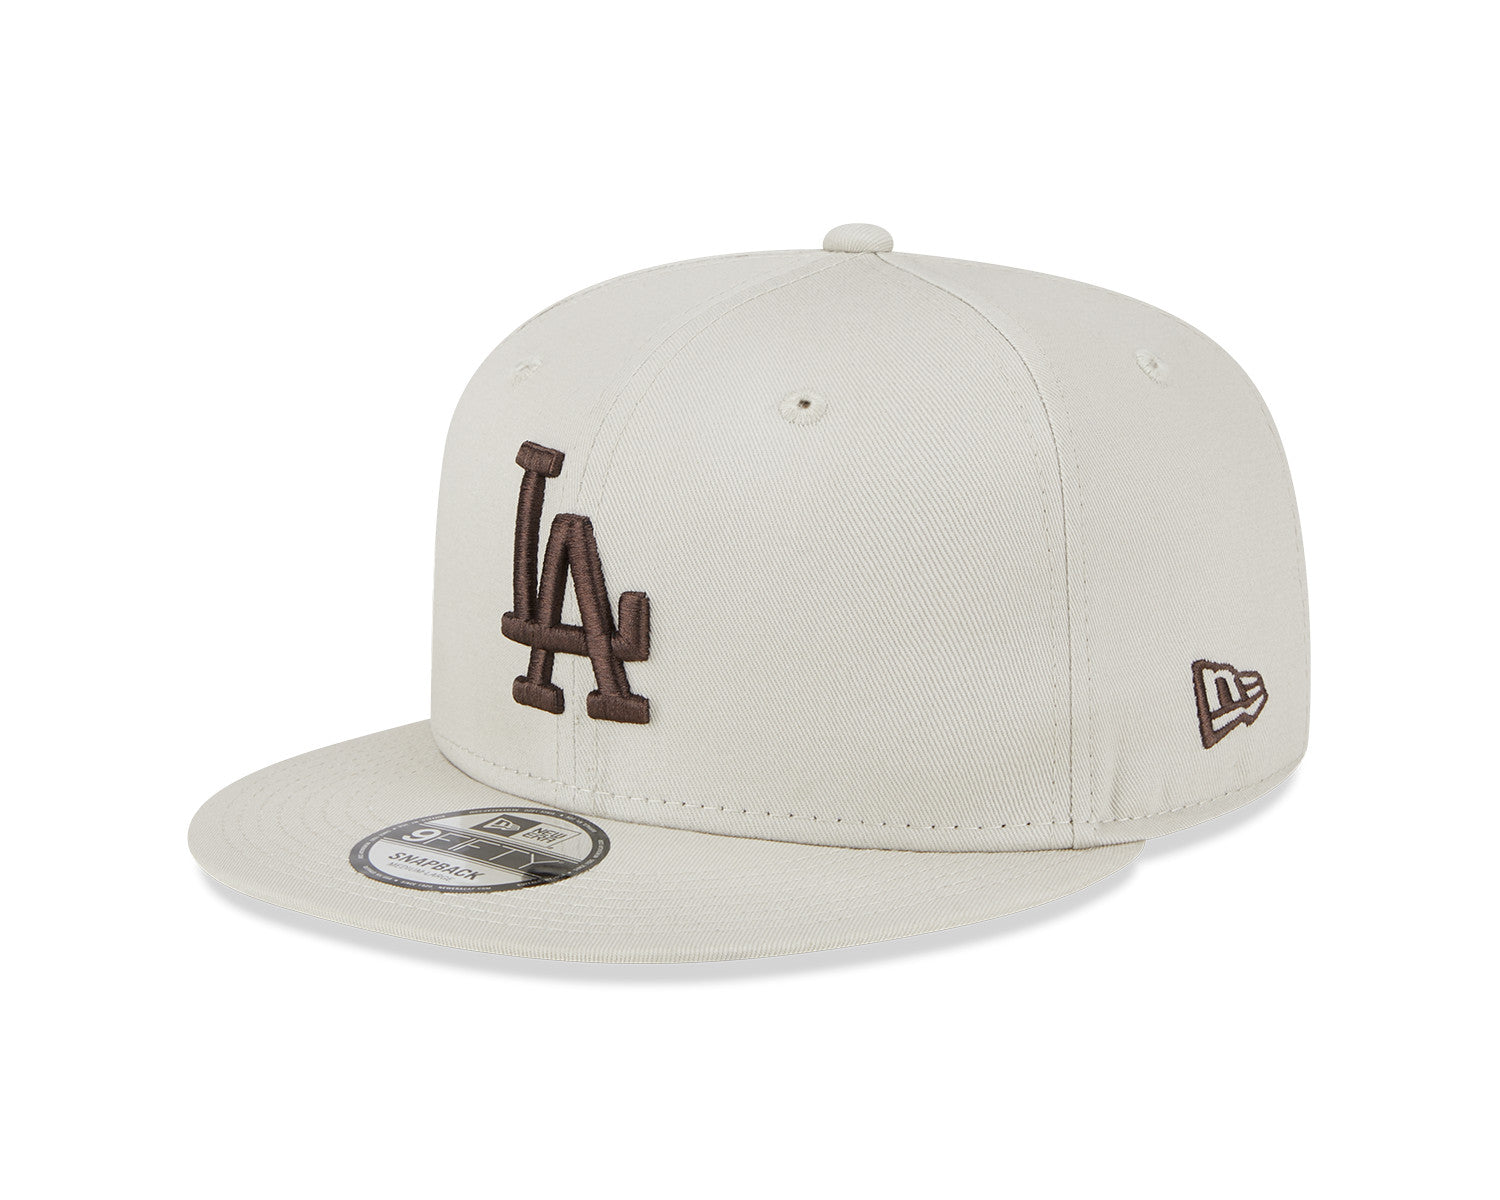 NEW ERA 9FIFTY LEAGUE ESSENTIAL LOS ANGELES DODGERS STONE SNAPBACK